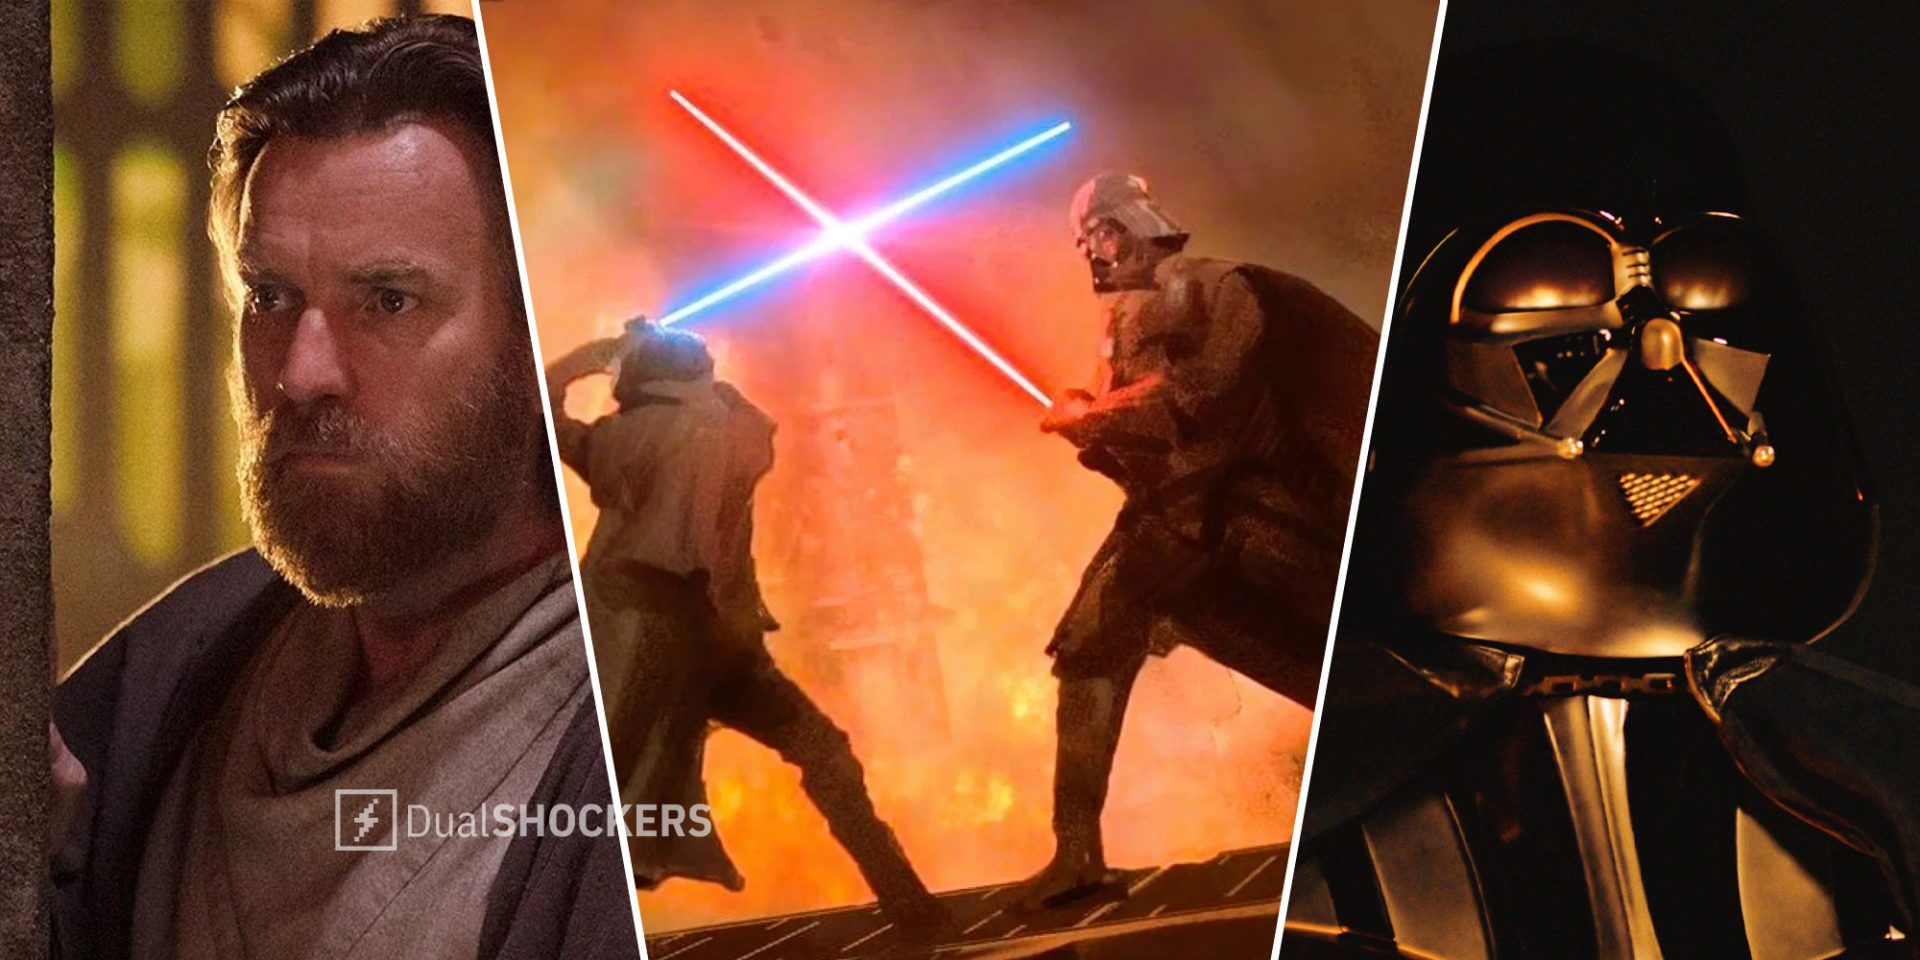 Obi-Wan Kenobi on left, Obi-Wan and Darth Vader with lightsabers fighting in middle, Darth Vader close-up on right